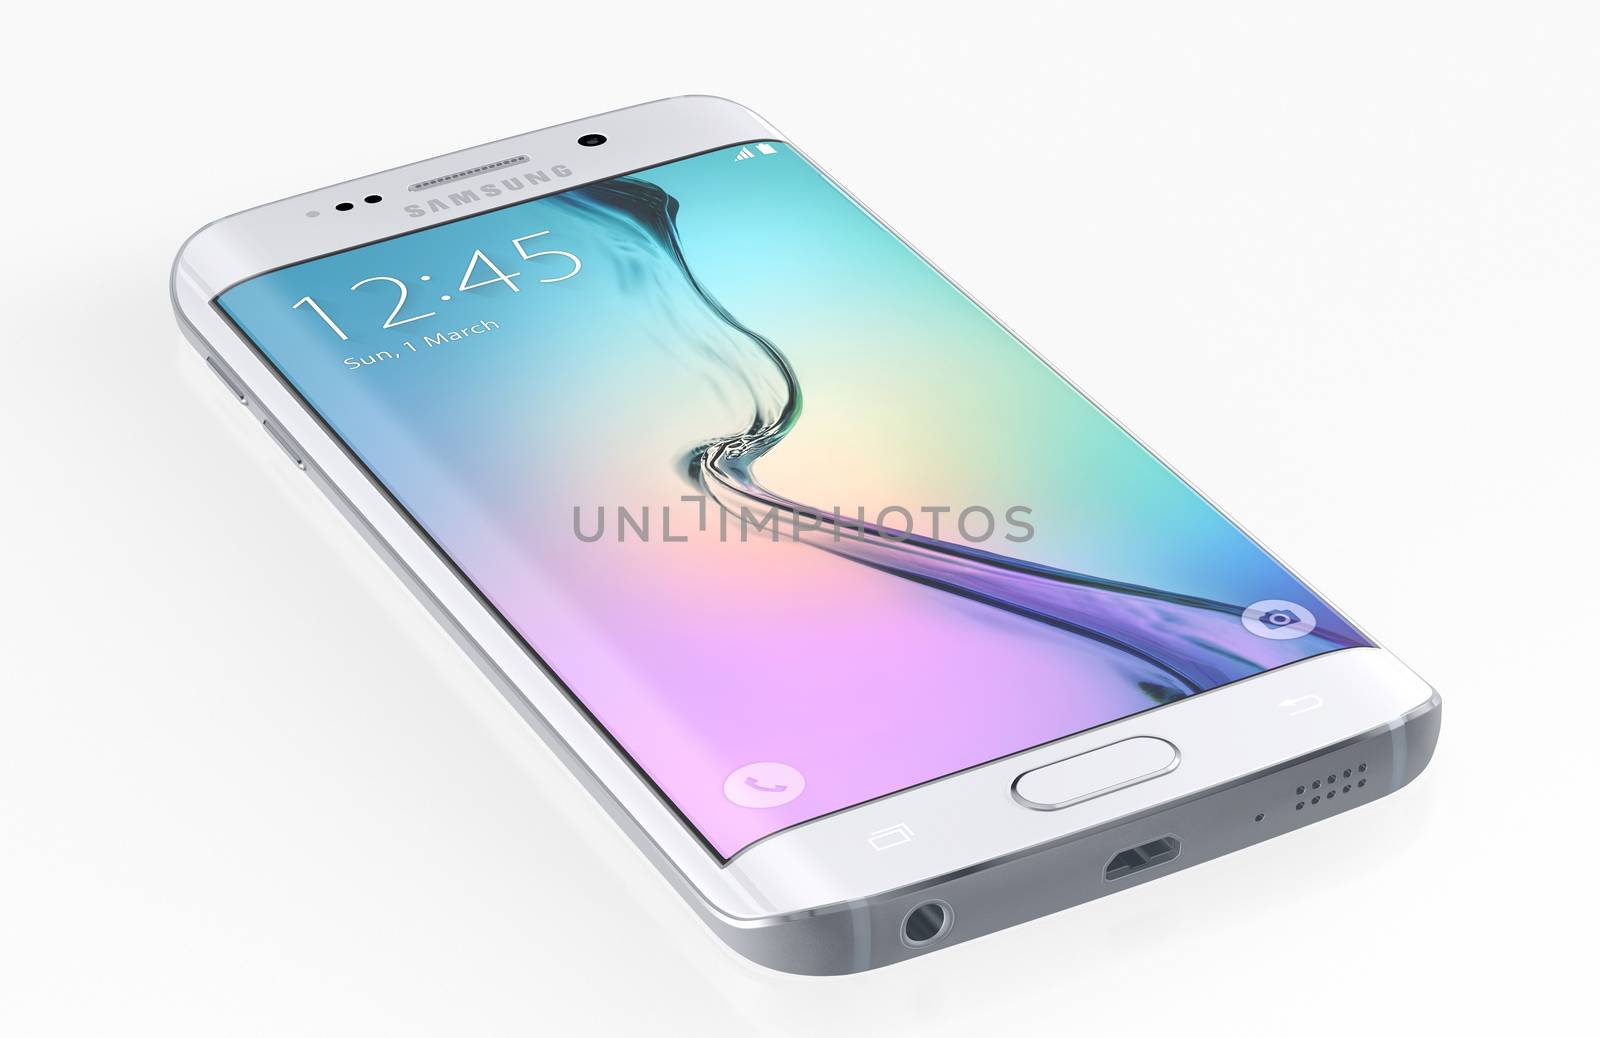 Galati, Romania - May 17, 2015: Samsung Galaxy S6 Edge is the first device with dual-curved glass display. The Samsung Galaxy S6 and Galaxy S6 Edge was launched at a press event in Barcelona on March 1 2015. Galaxy S6 has Quad HD Super AMOLED, 2560x1440, 577 PPI, Lightning-fast 64 bit and Octa-core processor.